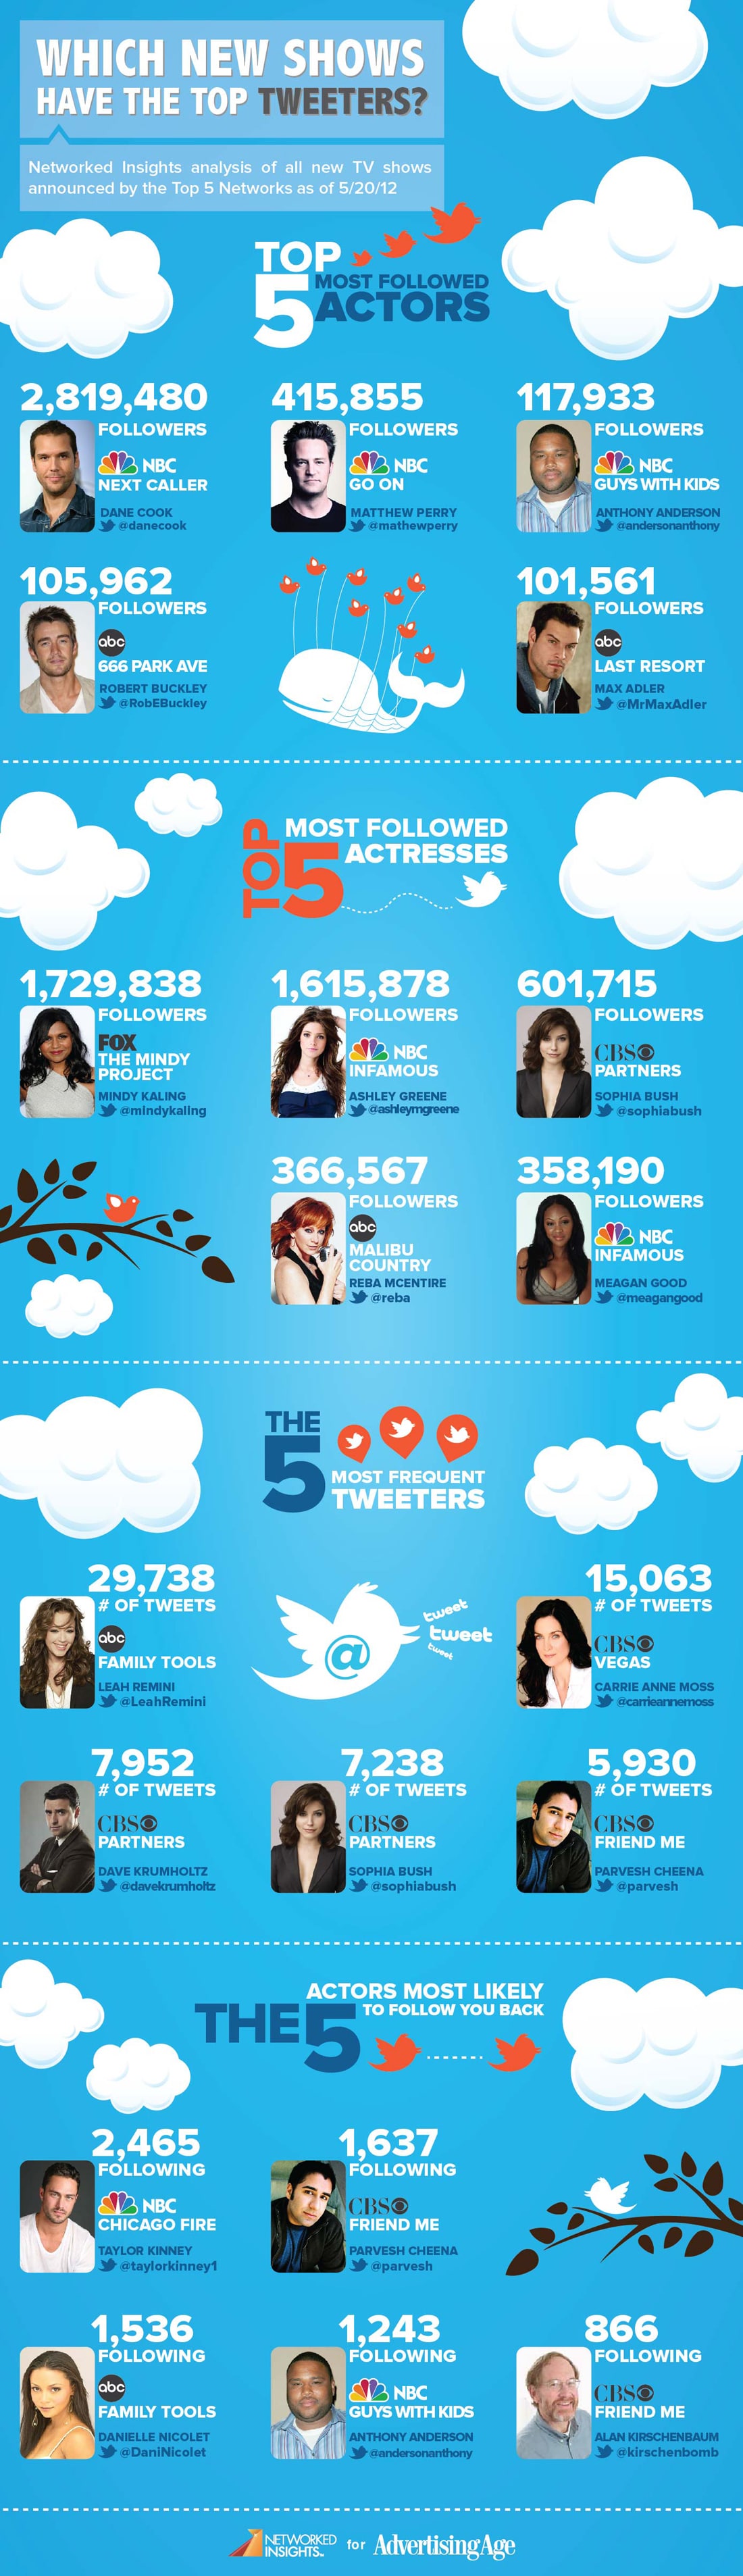 Television-Top-Tweeters-Followers-Infographic